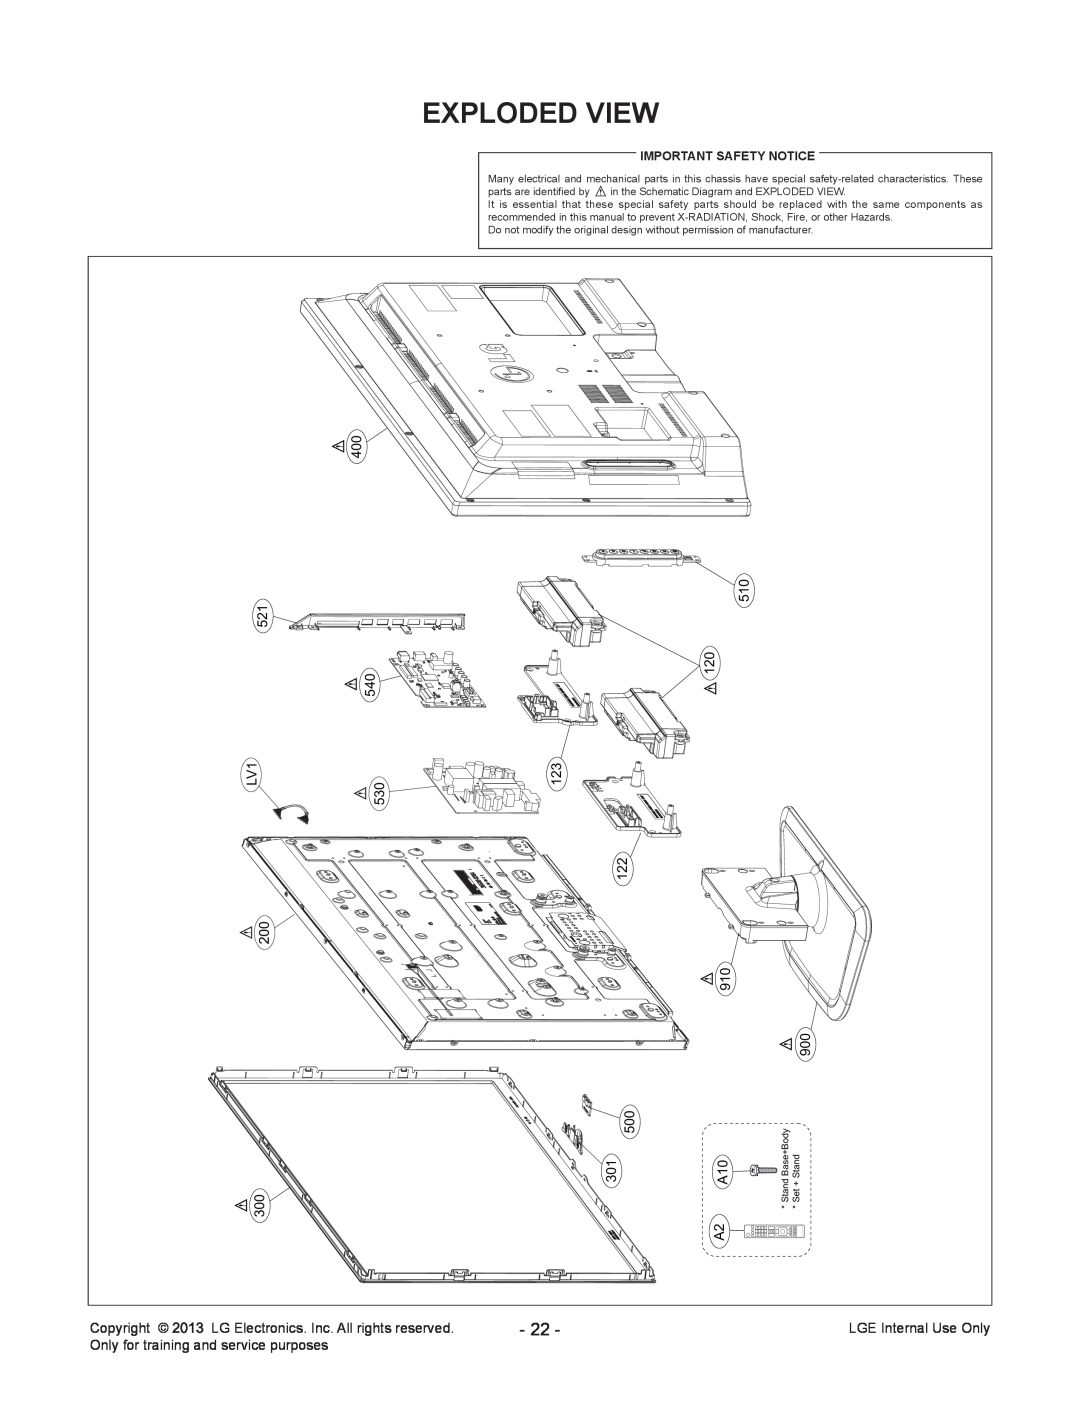 LG Electronics 42LN548C/549C Exploded View, Copyright, LG Electronics. Inc. All rights reserved, LGE Internal Use Only 